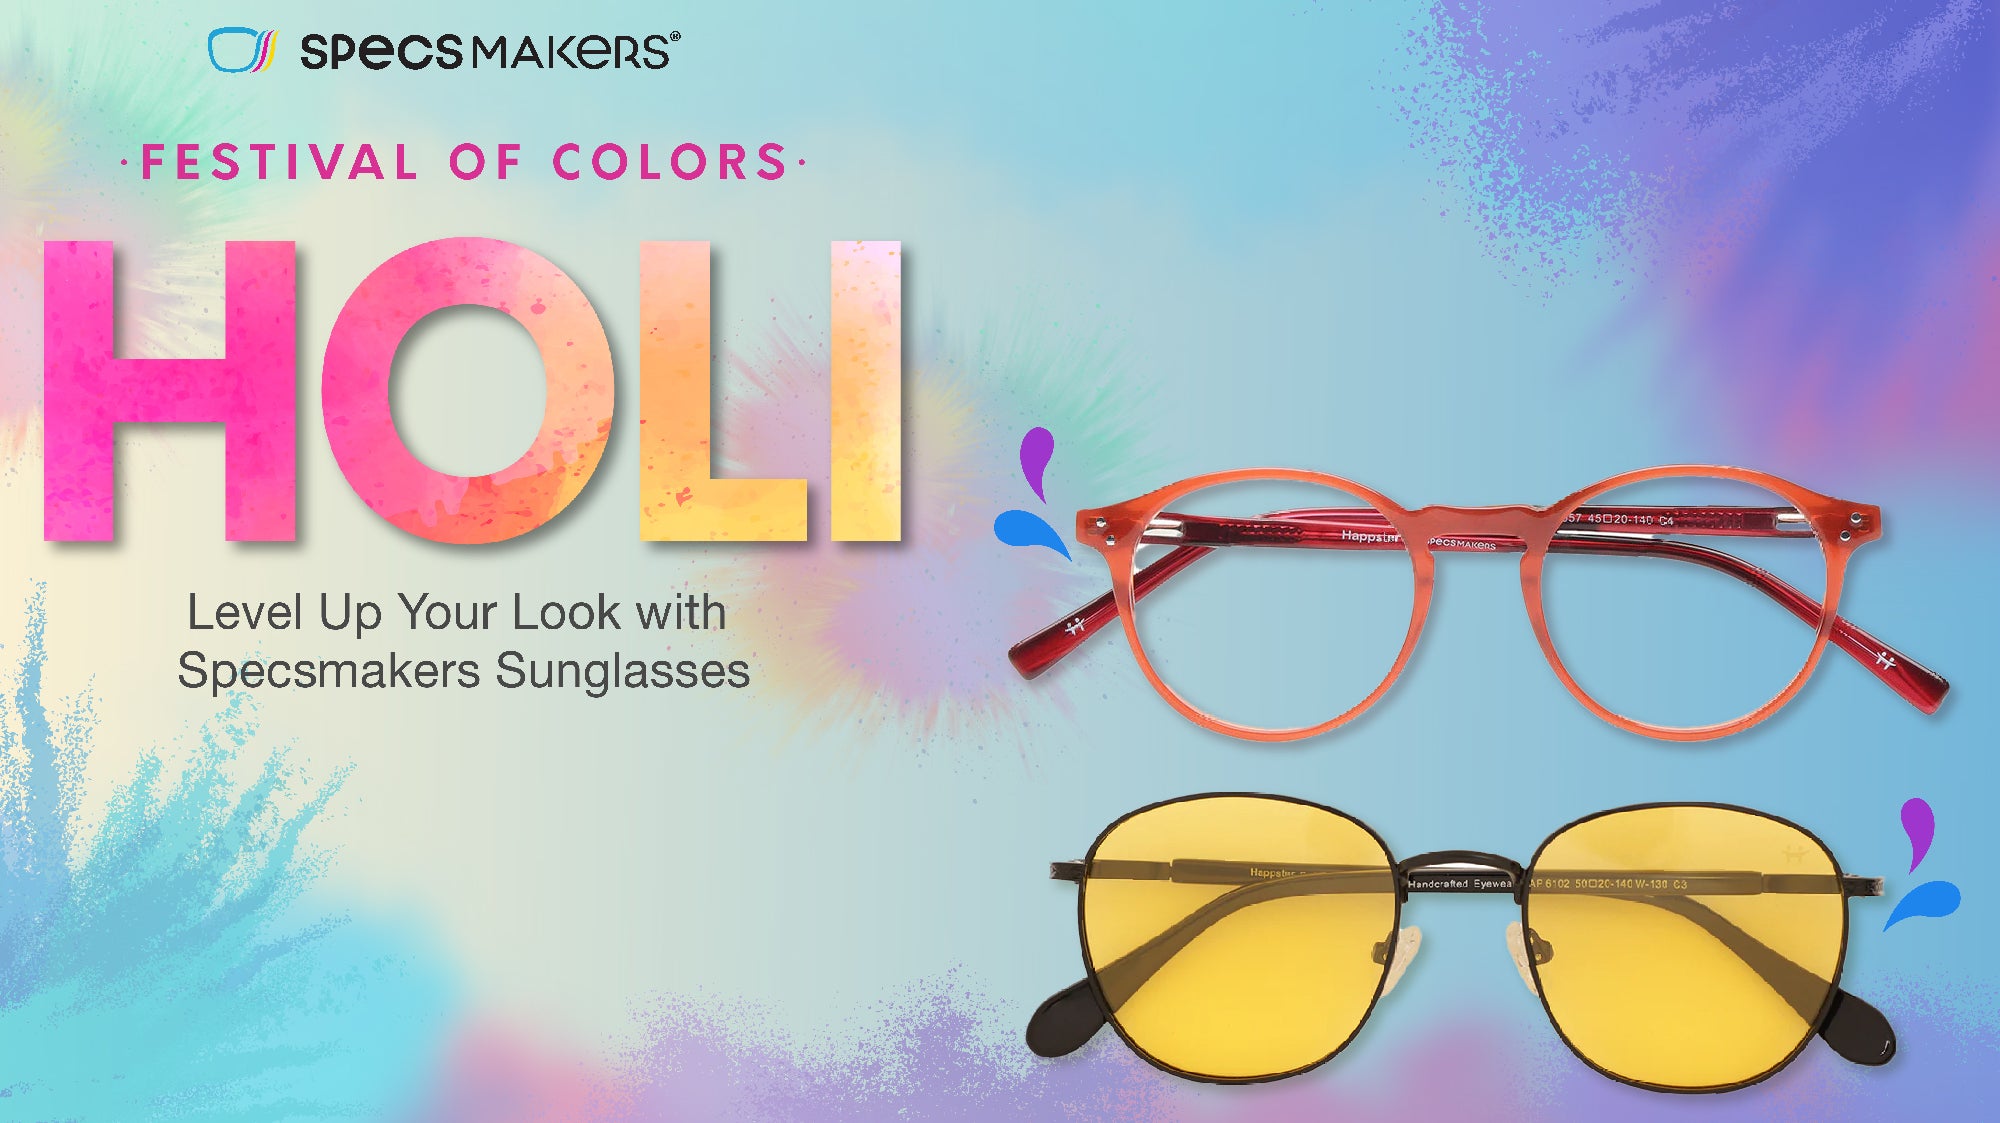 Level Up Your Holi Look with Specsmakers Sunglasses